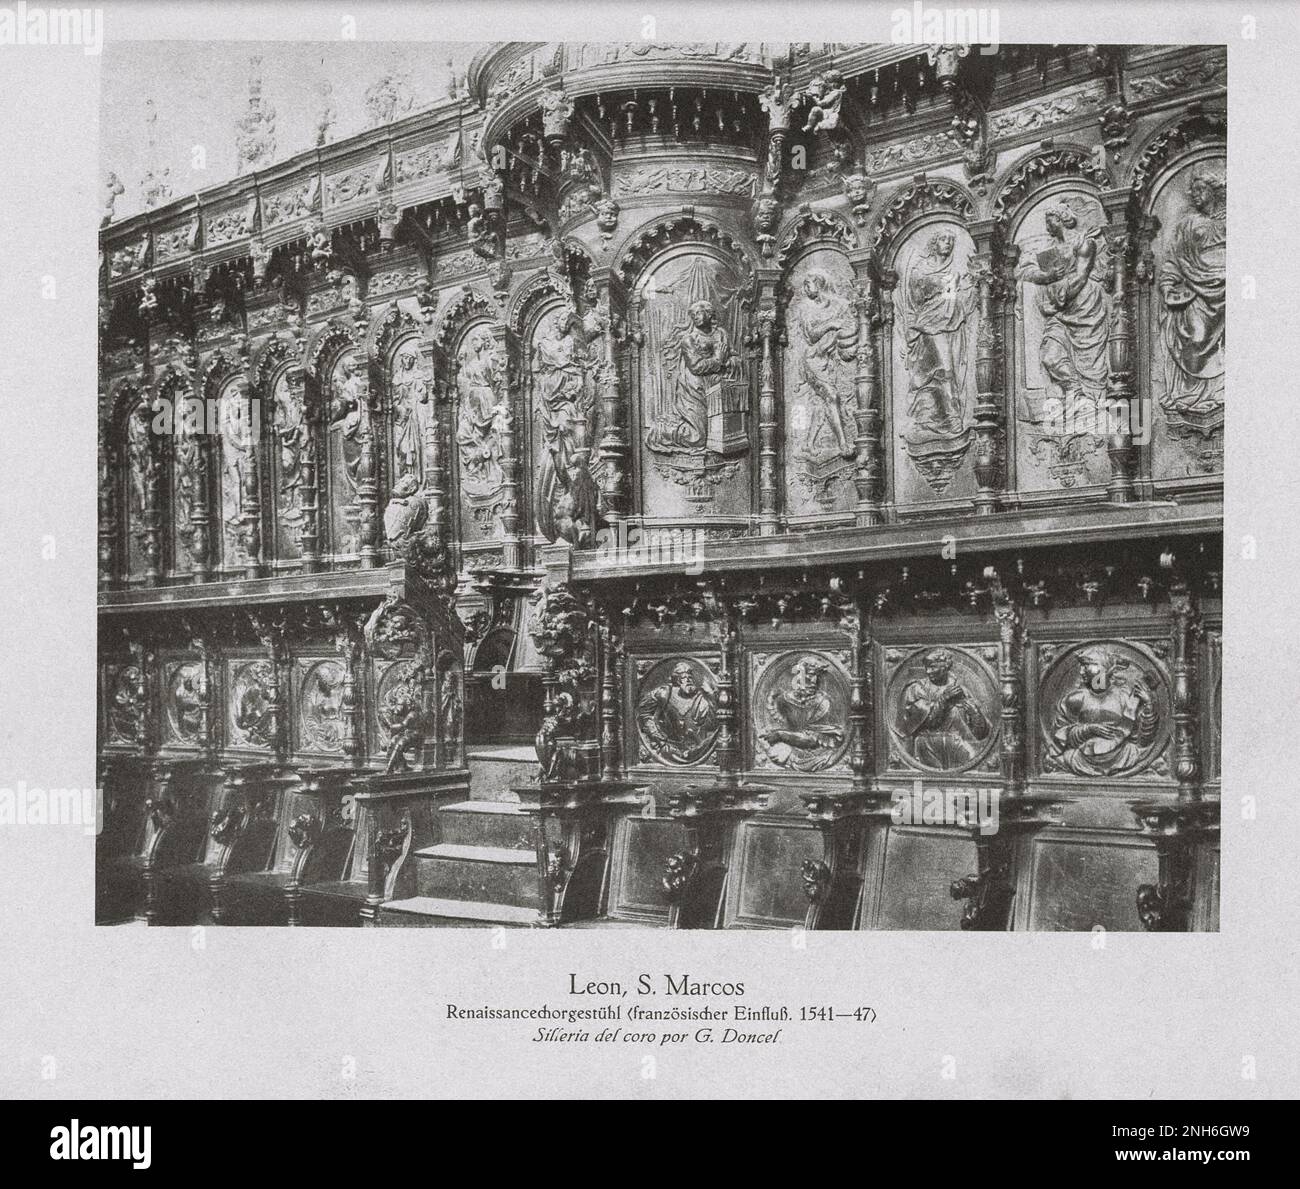 Architecture of Old Spain. Vintage photo of Convento de San Marcos in Leon. Choir stalls by G. Doncel Stock Photo